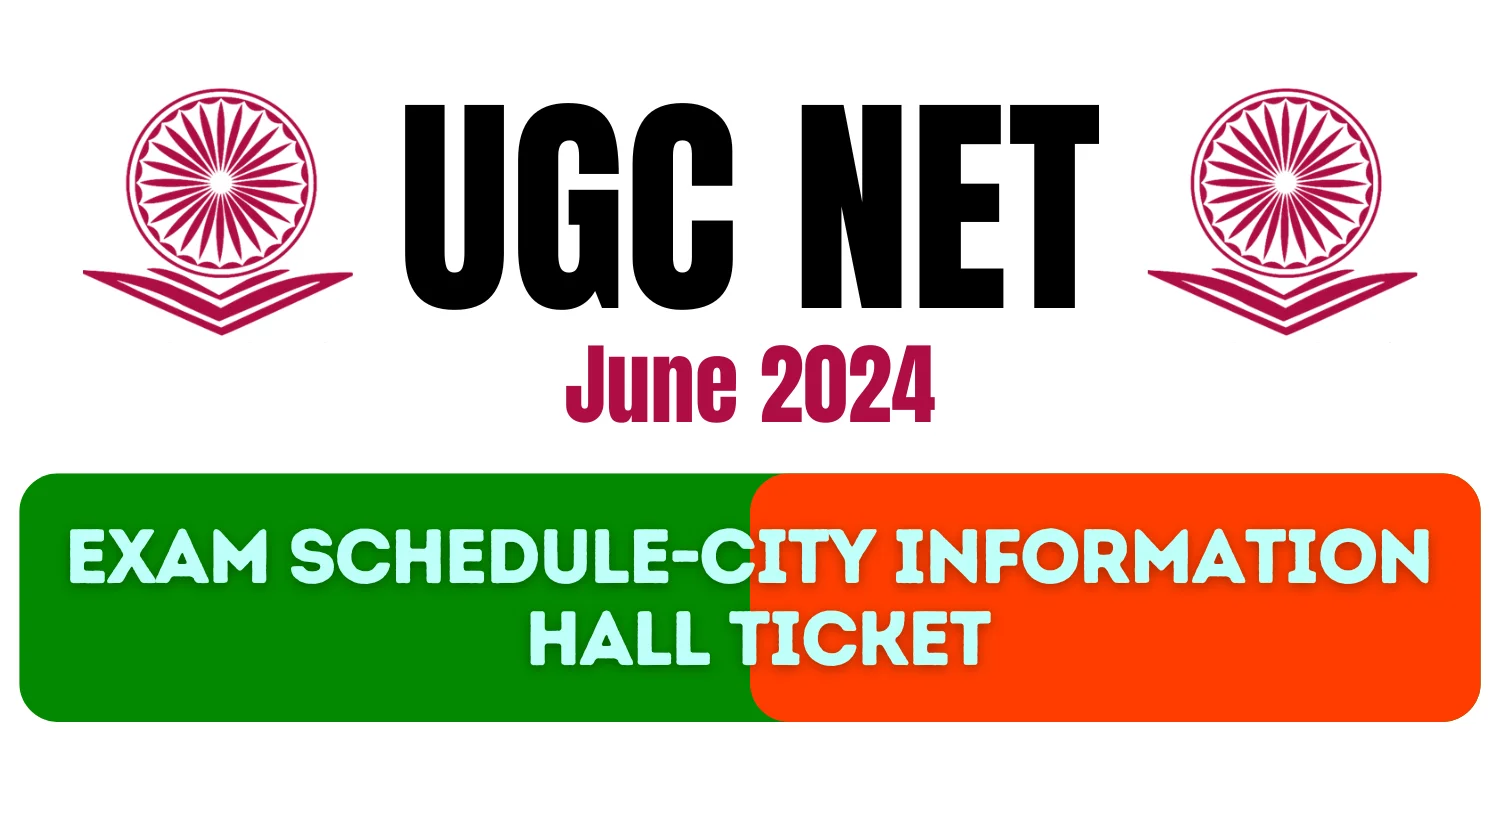 UGC NET June 2024 Exam Schedule & City Information Out, Check Hall Ticket Details Now